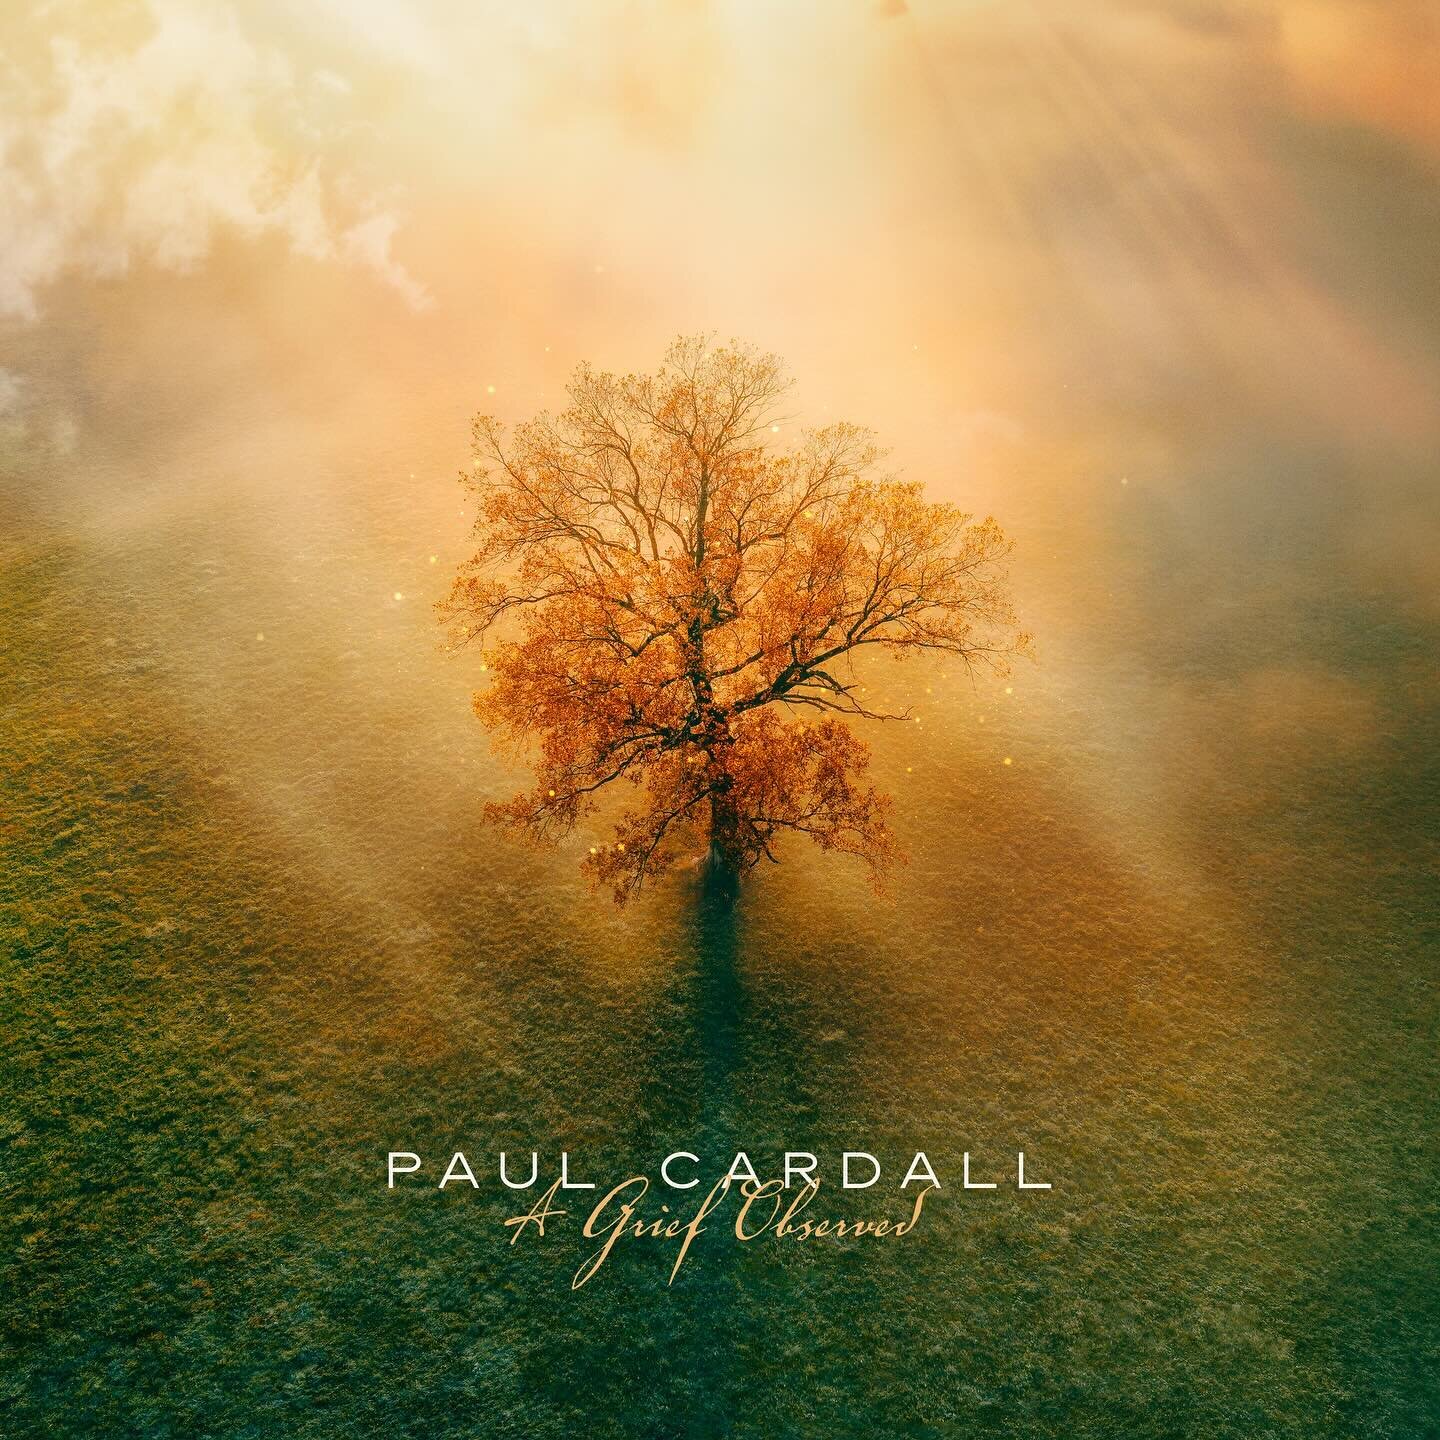 I&rsquo;ve never met anyone like @paulcardall - not only is he clearly an incredibly talented musician (duhhh) he&rsquo;s also one of the most sincere and loyal dudes on the planet. Honored to know him, and incredibly honored to get to collaborate on